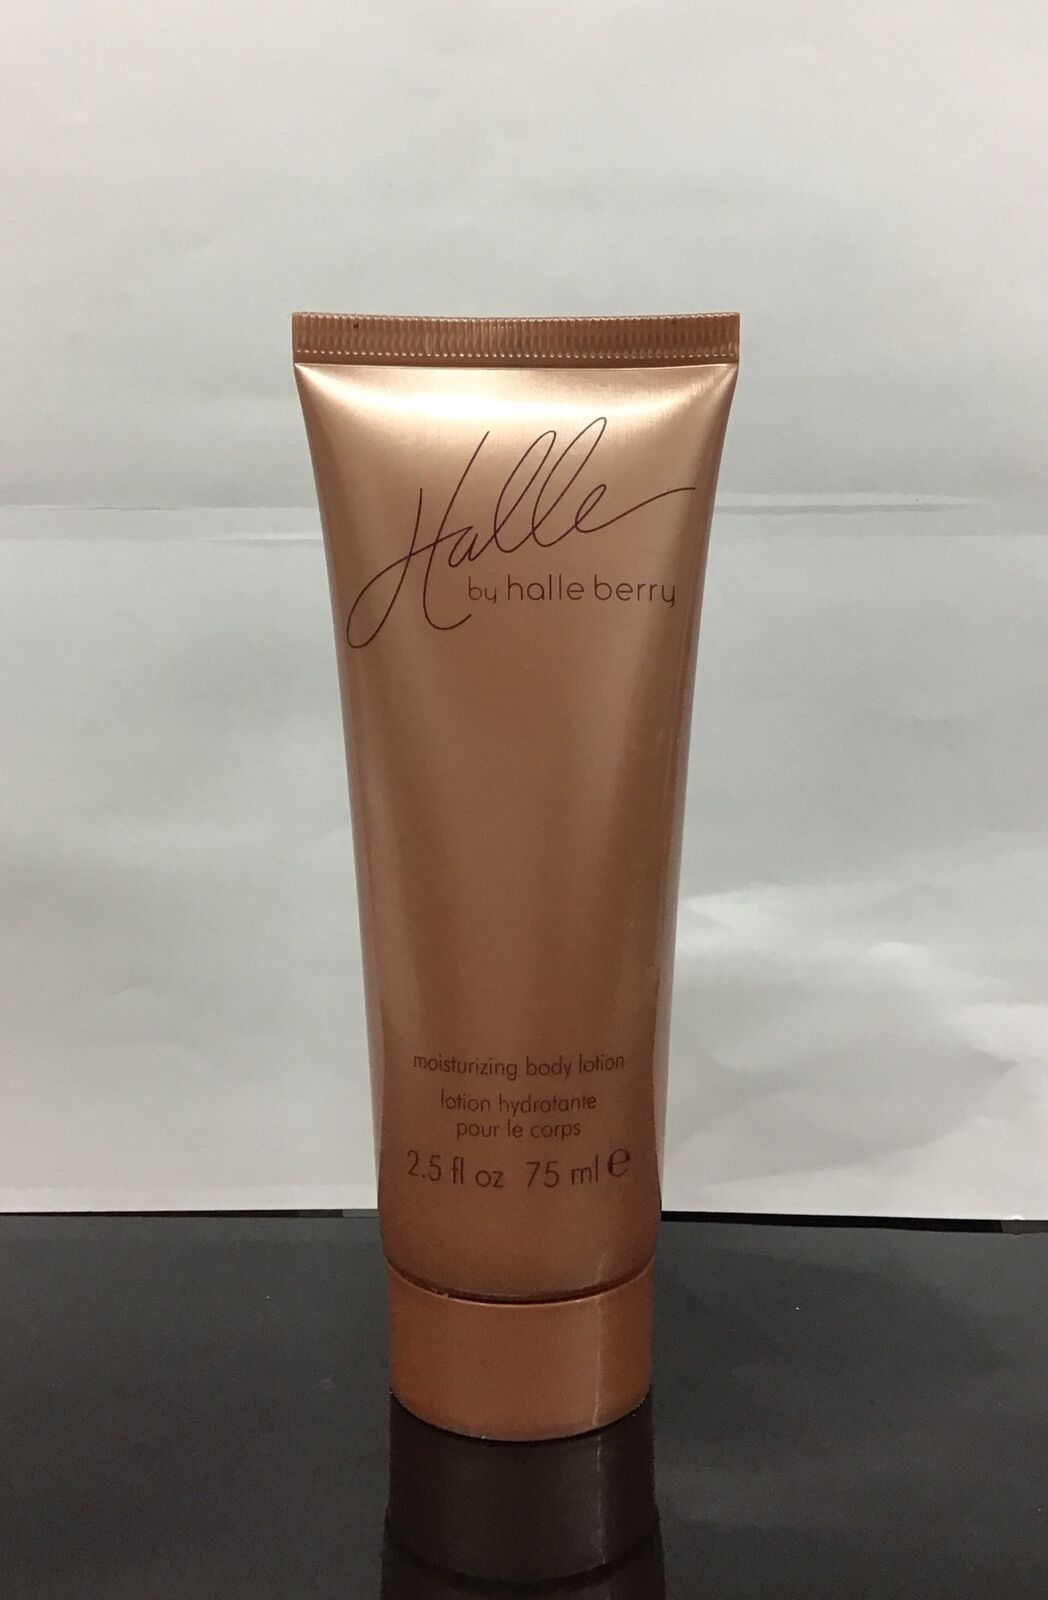 Halle By Halle Berry Moisturizing Body Lotion 2.5 Fl Oz, As Pictured, No Box.